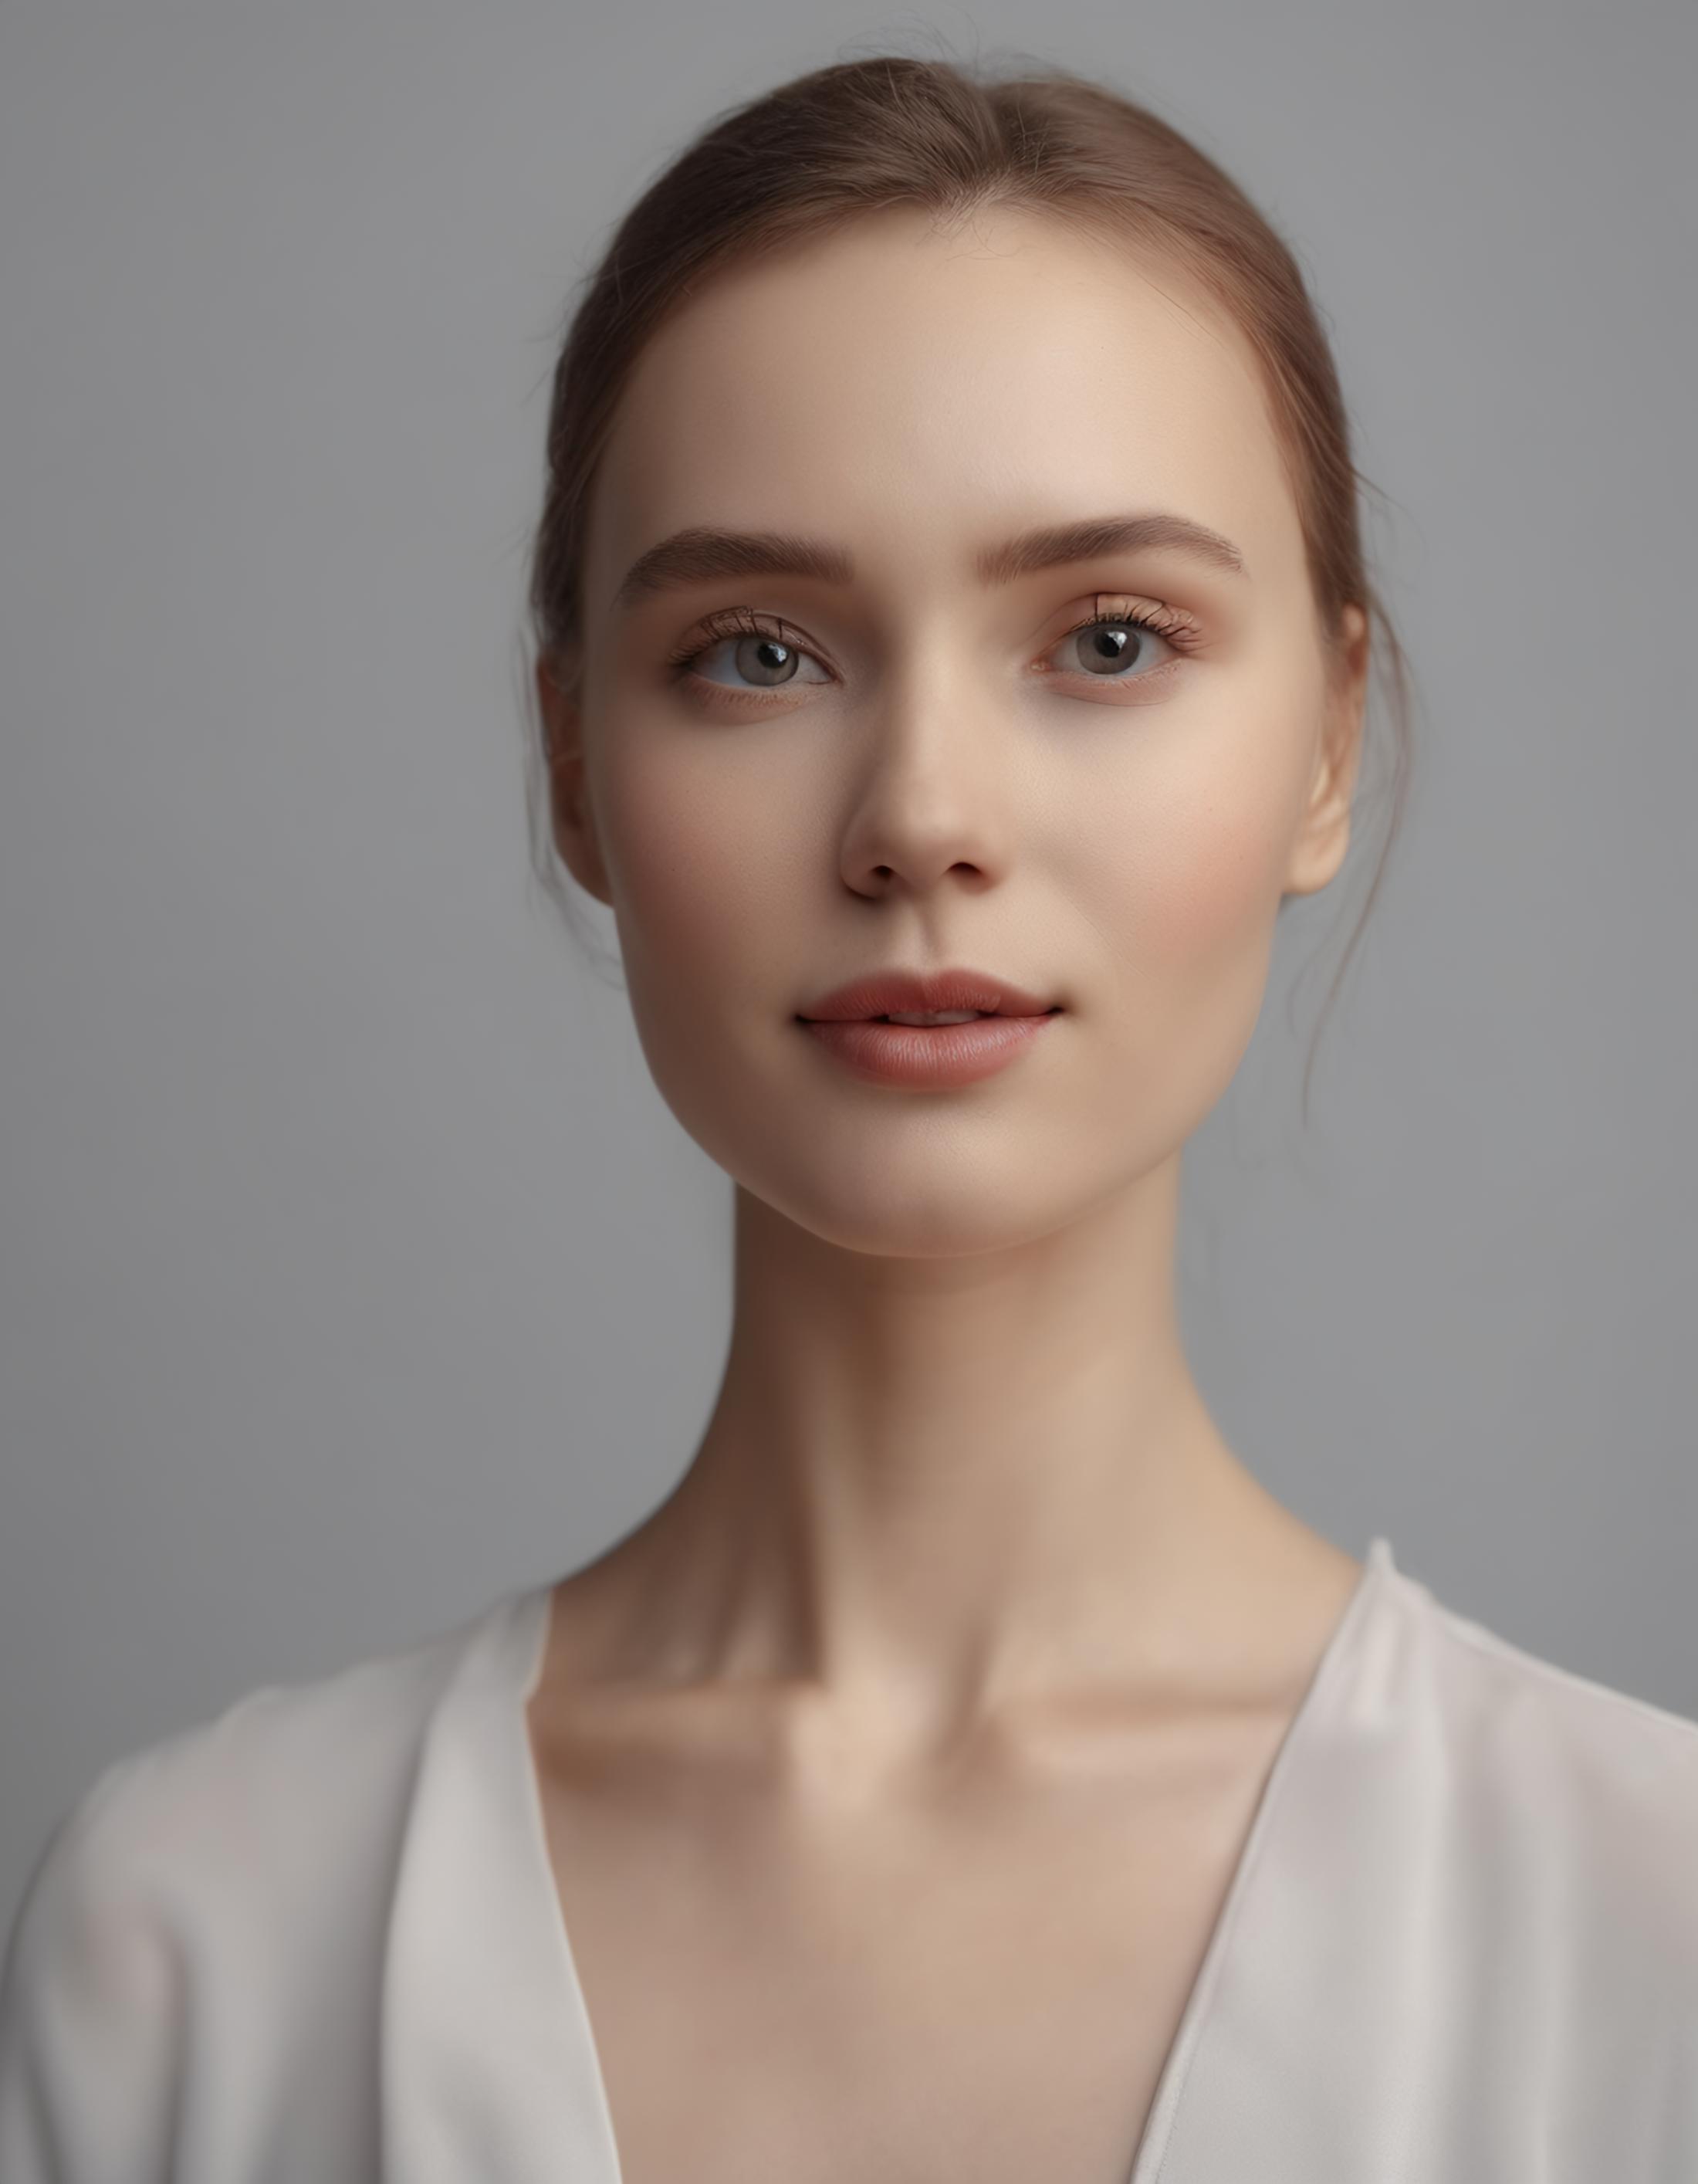 AI model image by Standspurfahrer